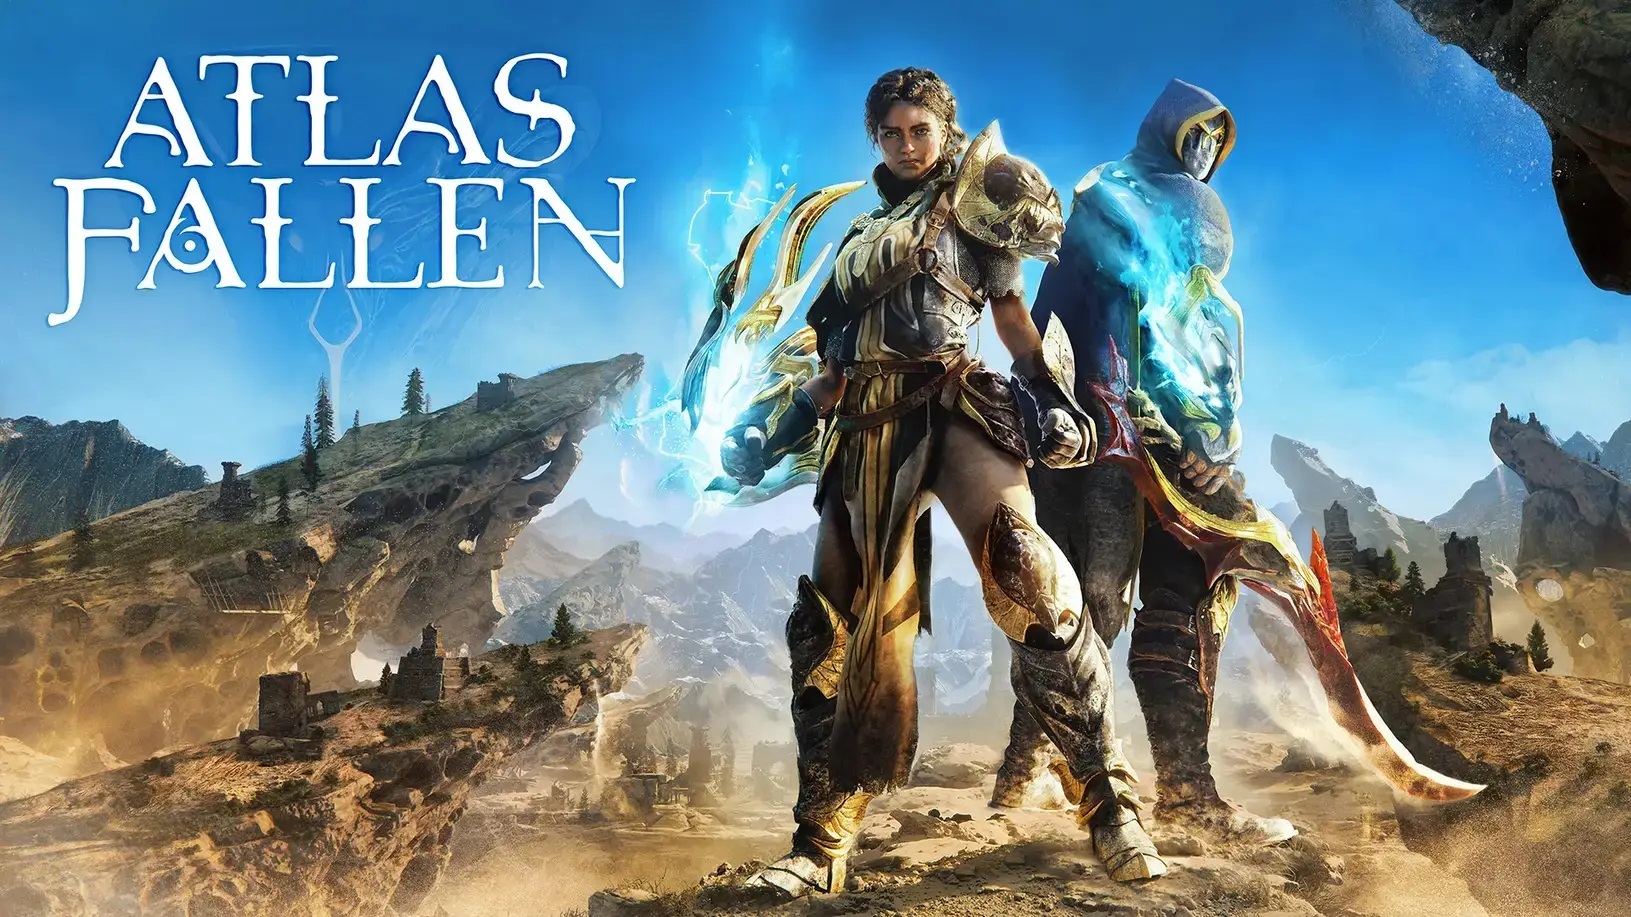 Atlas Fallen: New action RPG from the creators of "The Surge" in the Gamescom trailer